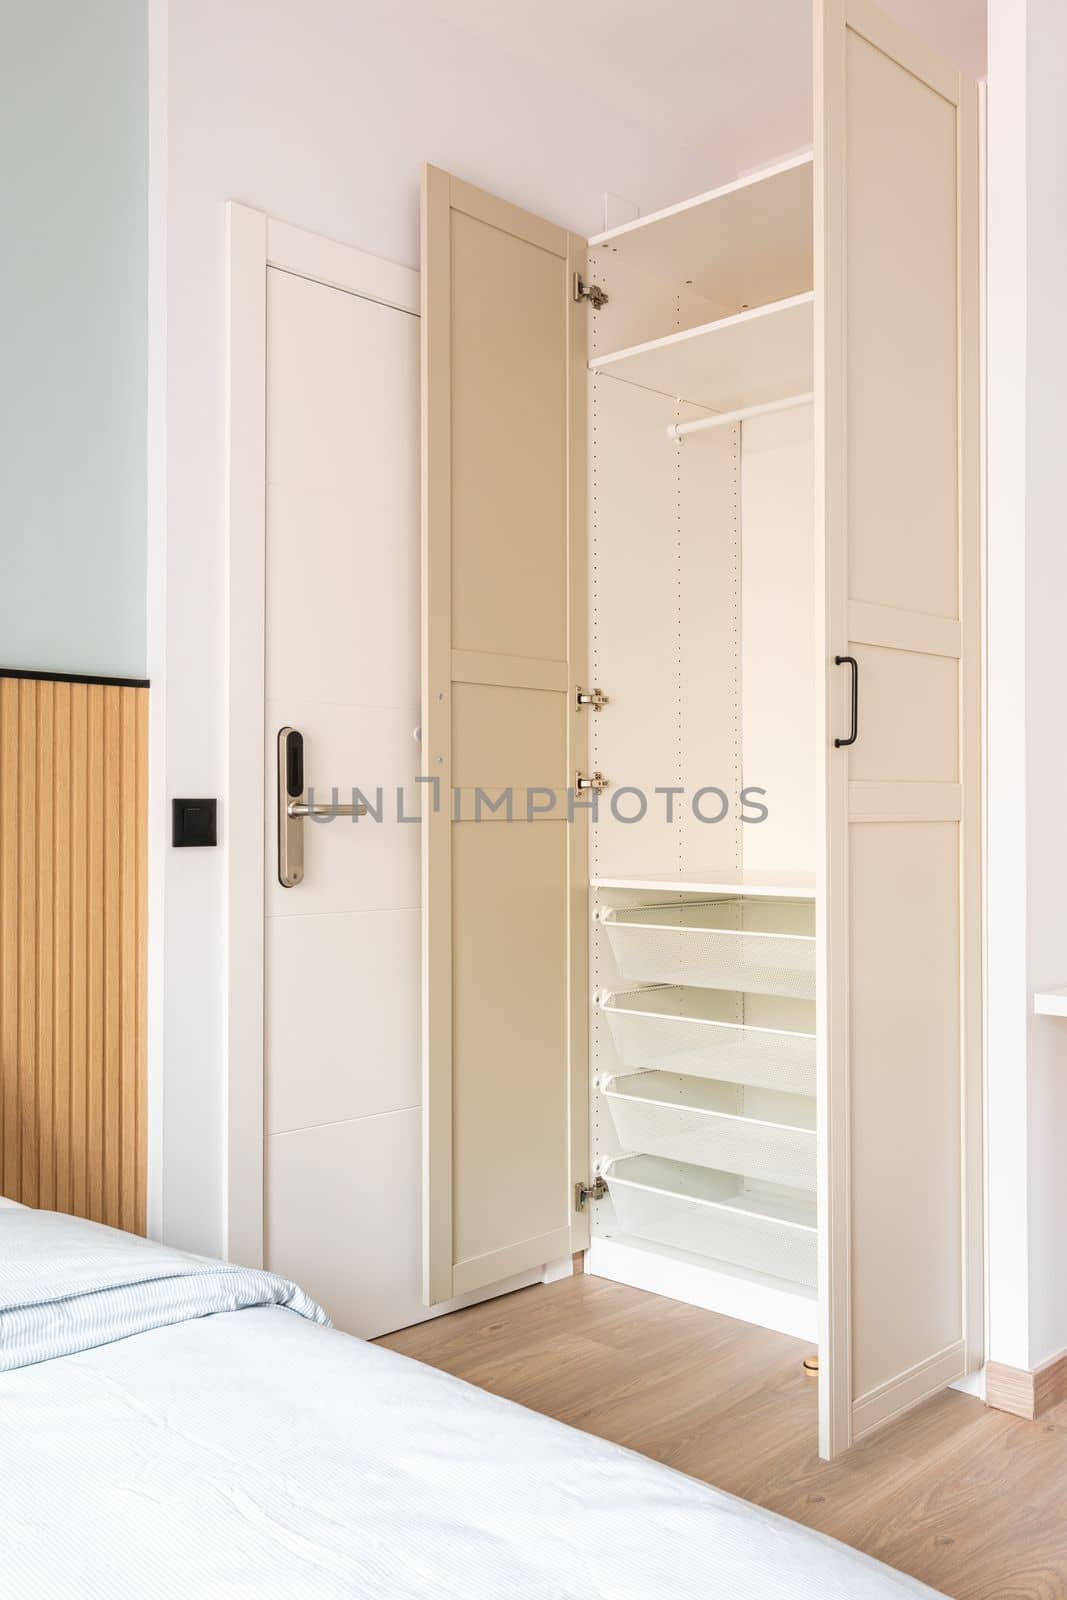 Built-in wooden wardrobe with open doors in beige. Inside the cabinet, all shelves, drawers, crossbars are made of white durable plastic. Entrance to the hotel room with an electronic lock. by apavlin